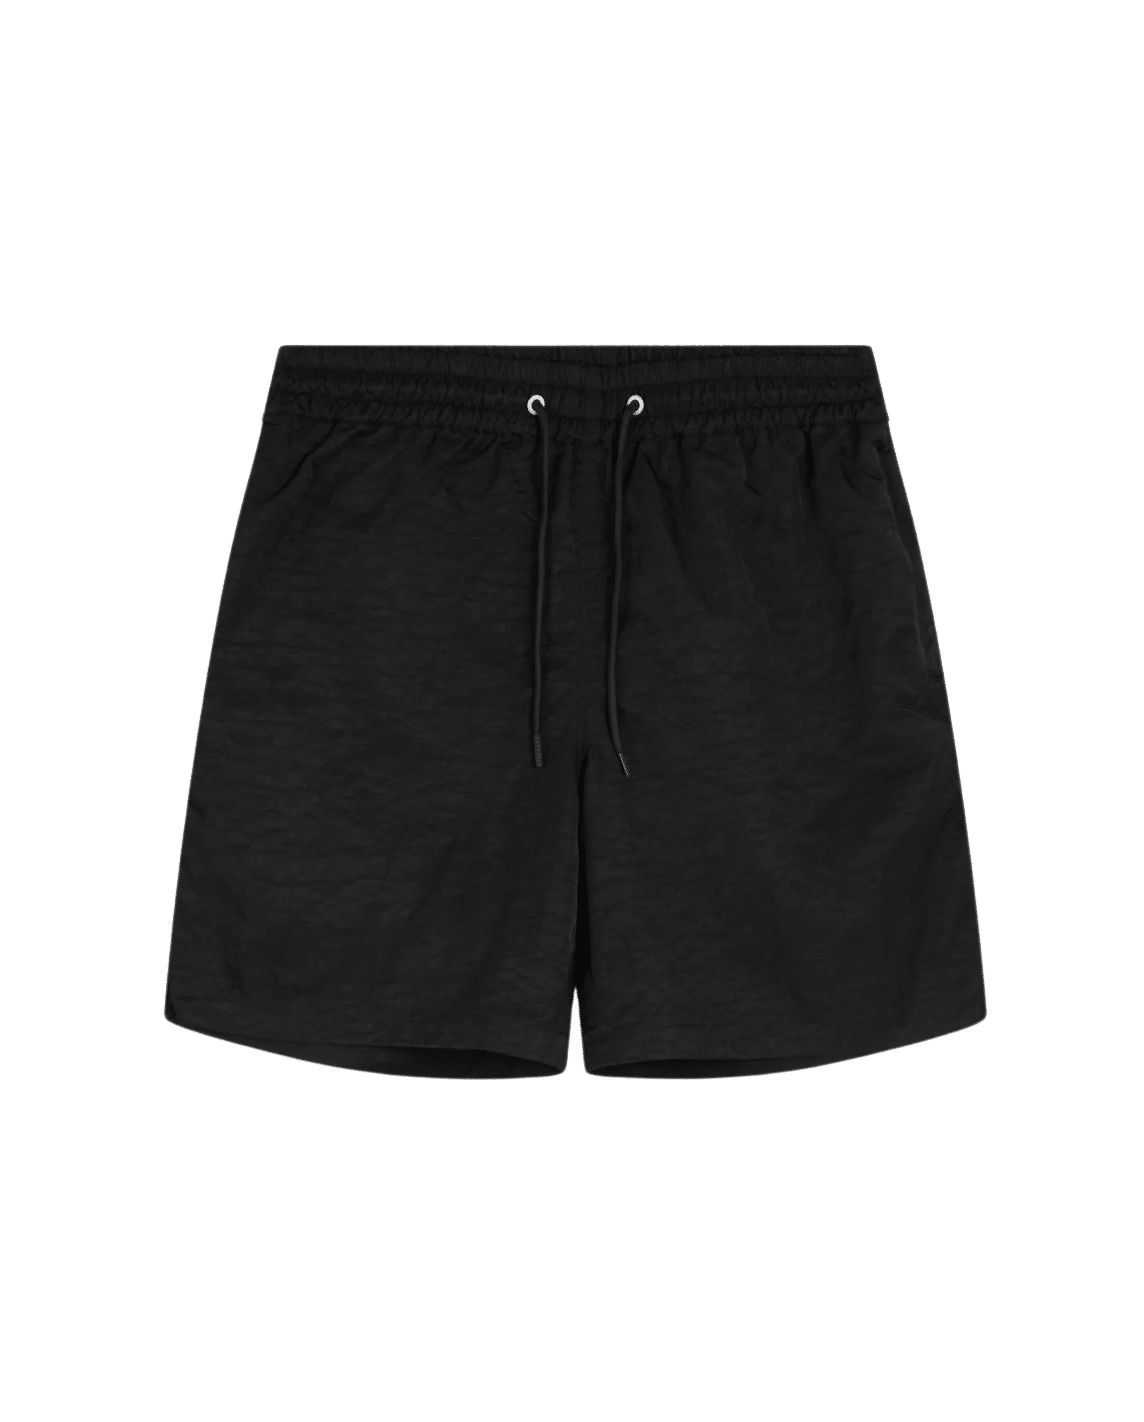 SUNFLOWER Mike Shorts - Black Front